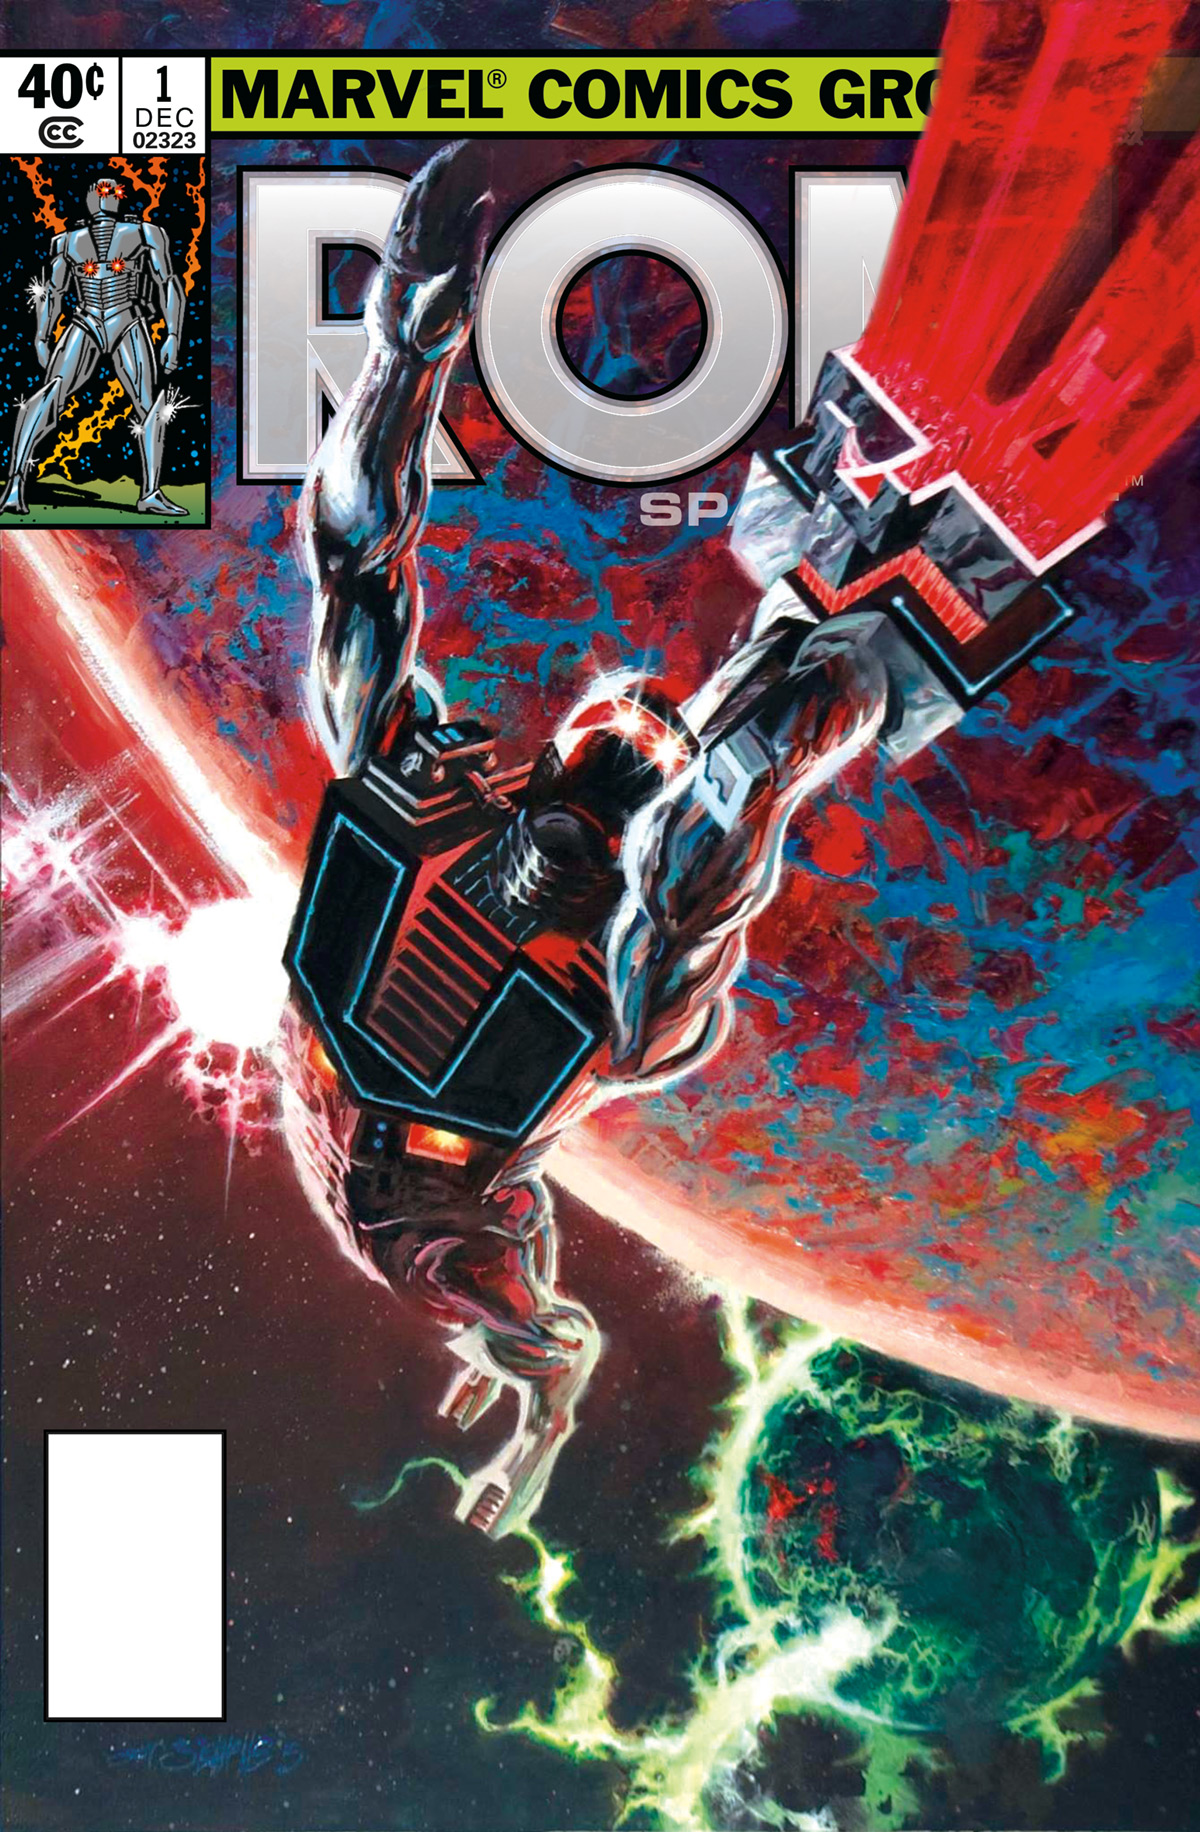 Rom: Space Knight #5